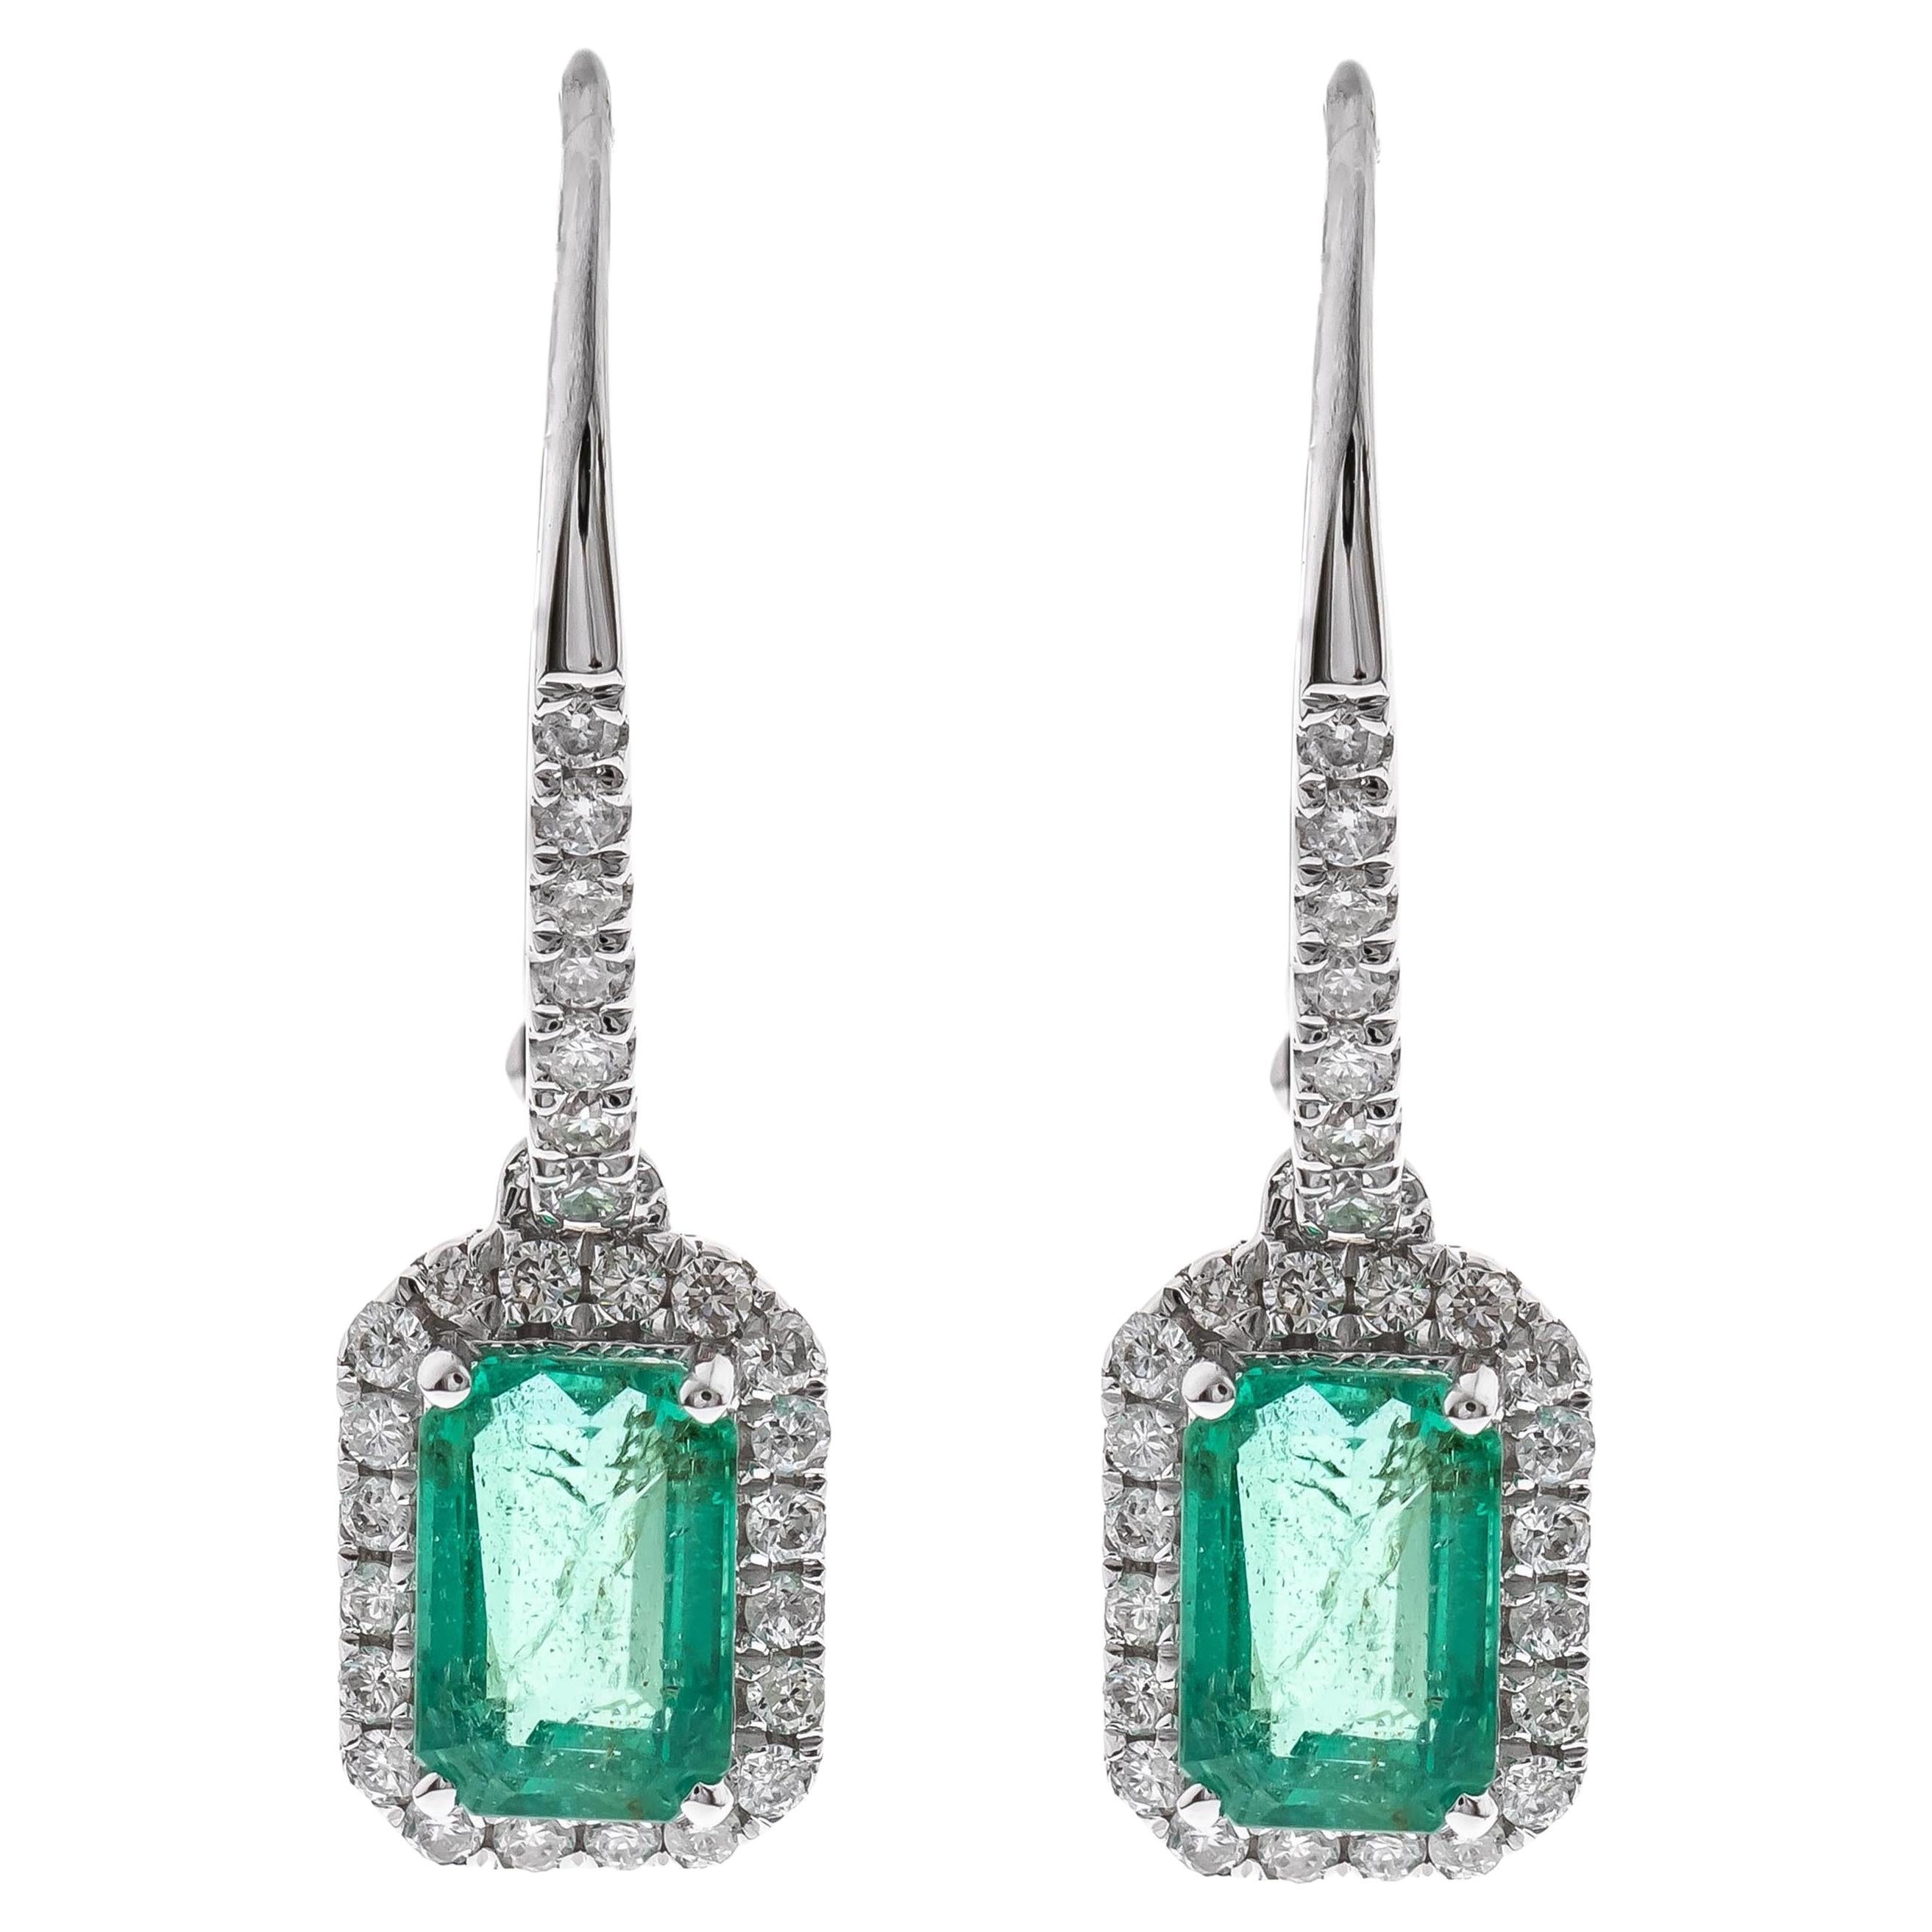 1.22 carat Emerald-cut Emerald With Diamond accents 14K White Gold Earring. For Sale